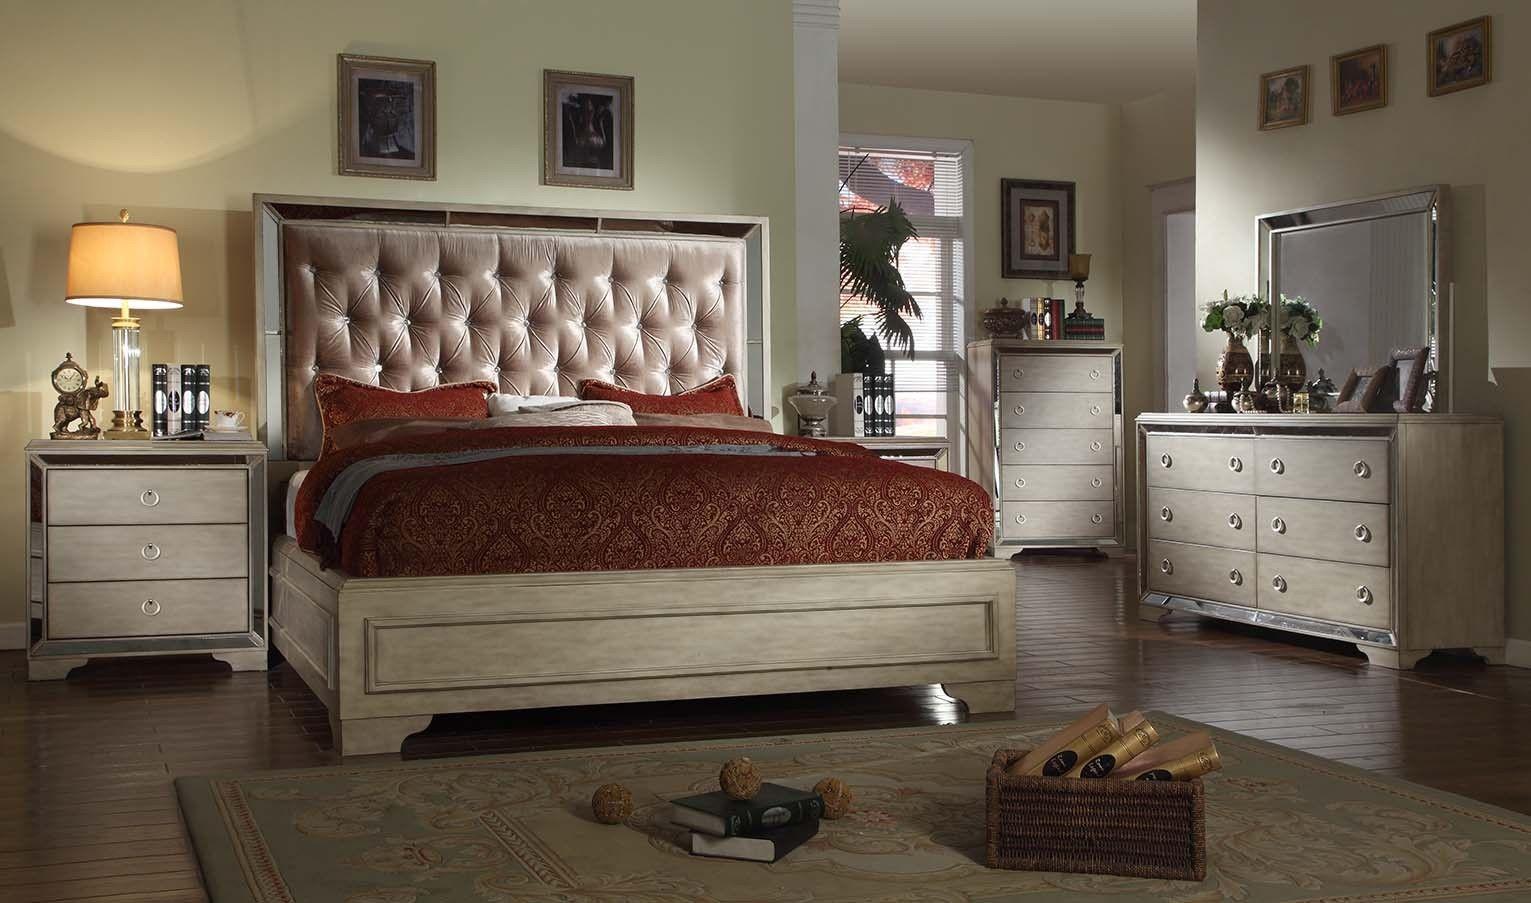 Contemporary Platform Bedroom Set Imperial B9805 B9805 - Q 3Pcs in Walnut Faux Leather